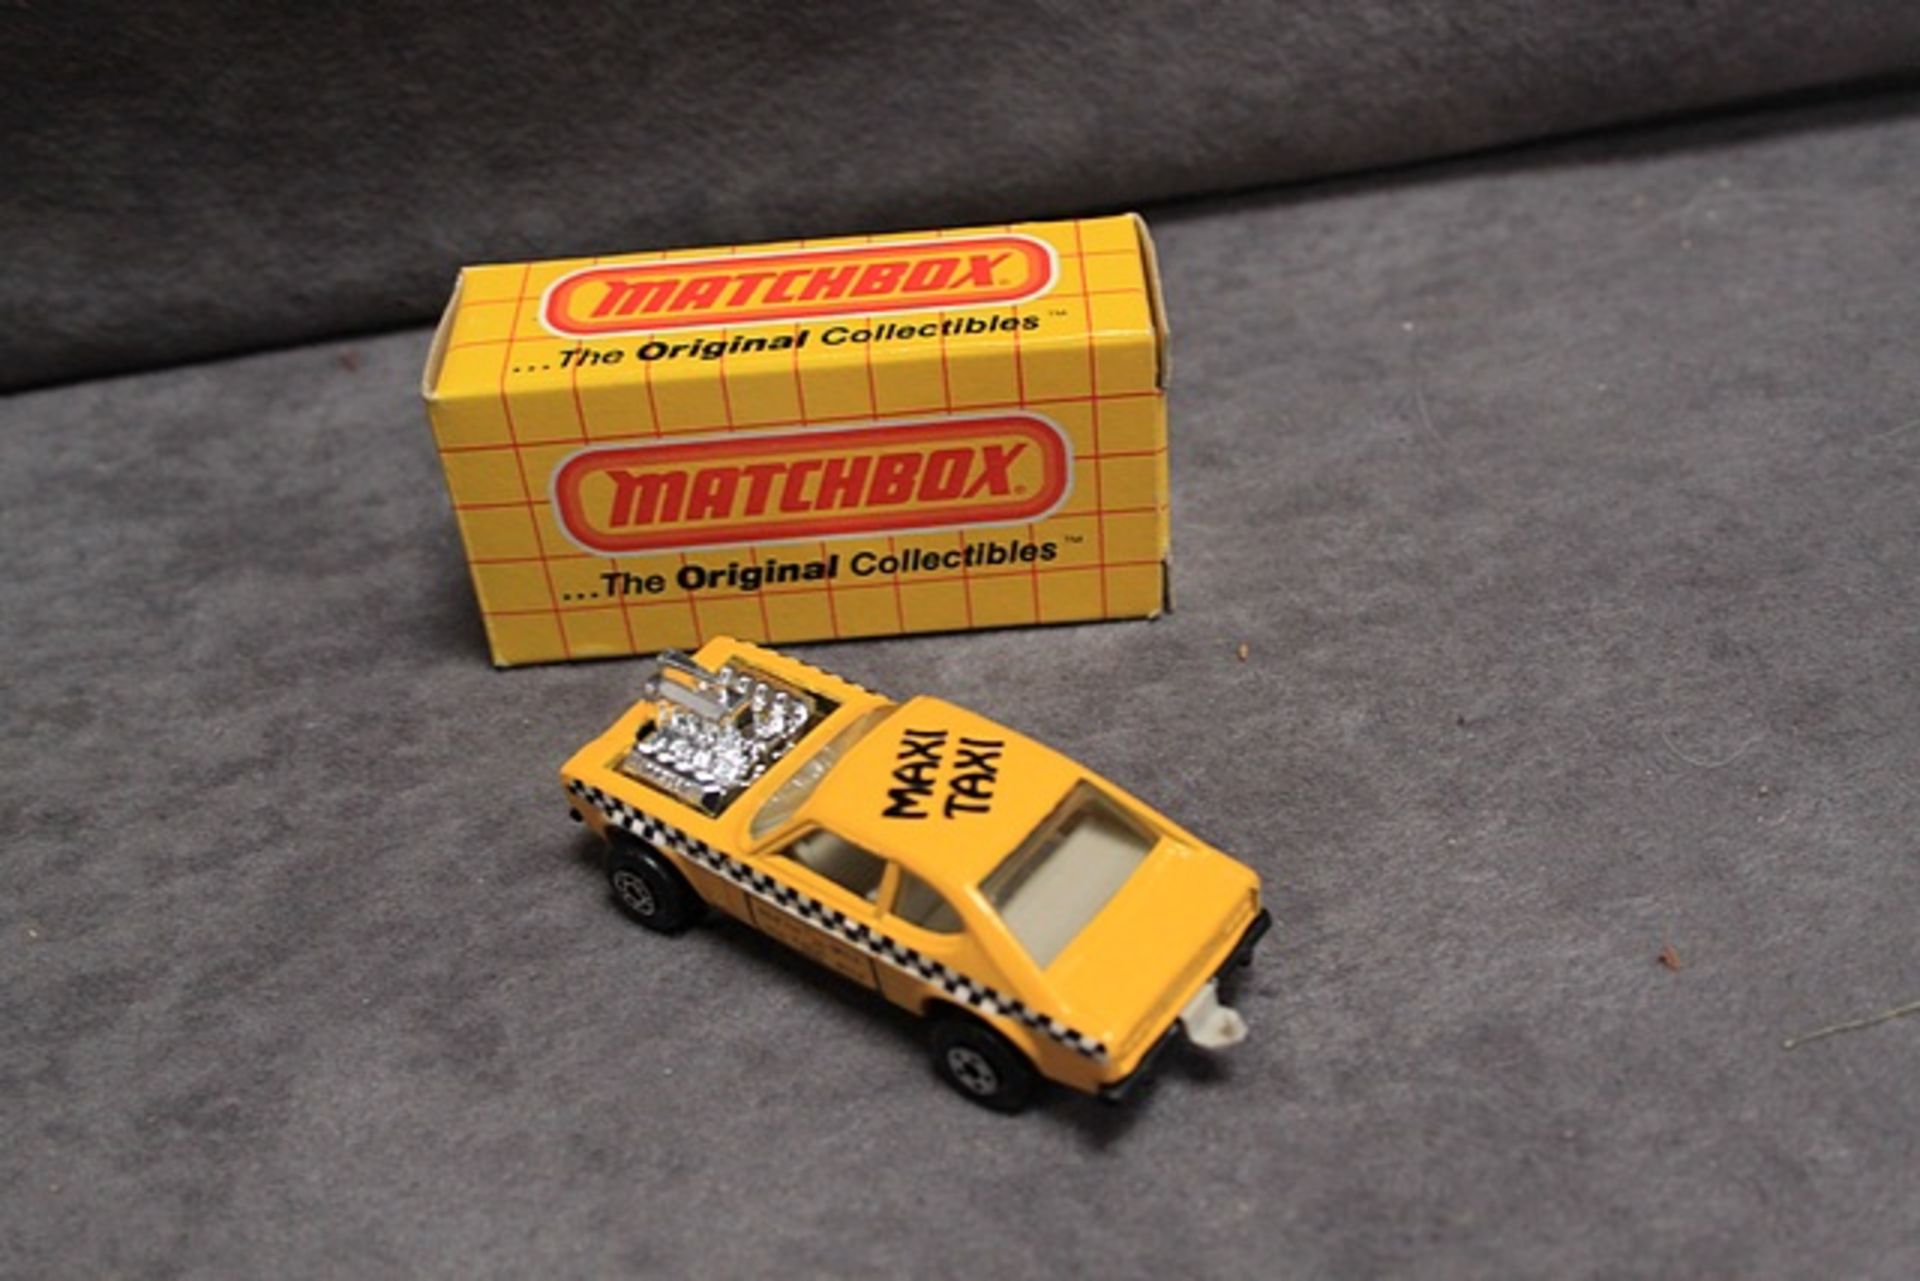 Mint Matchbox Series diecast #72 Maxi taxi in bright yellow excellent box (made in Hon Kong)